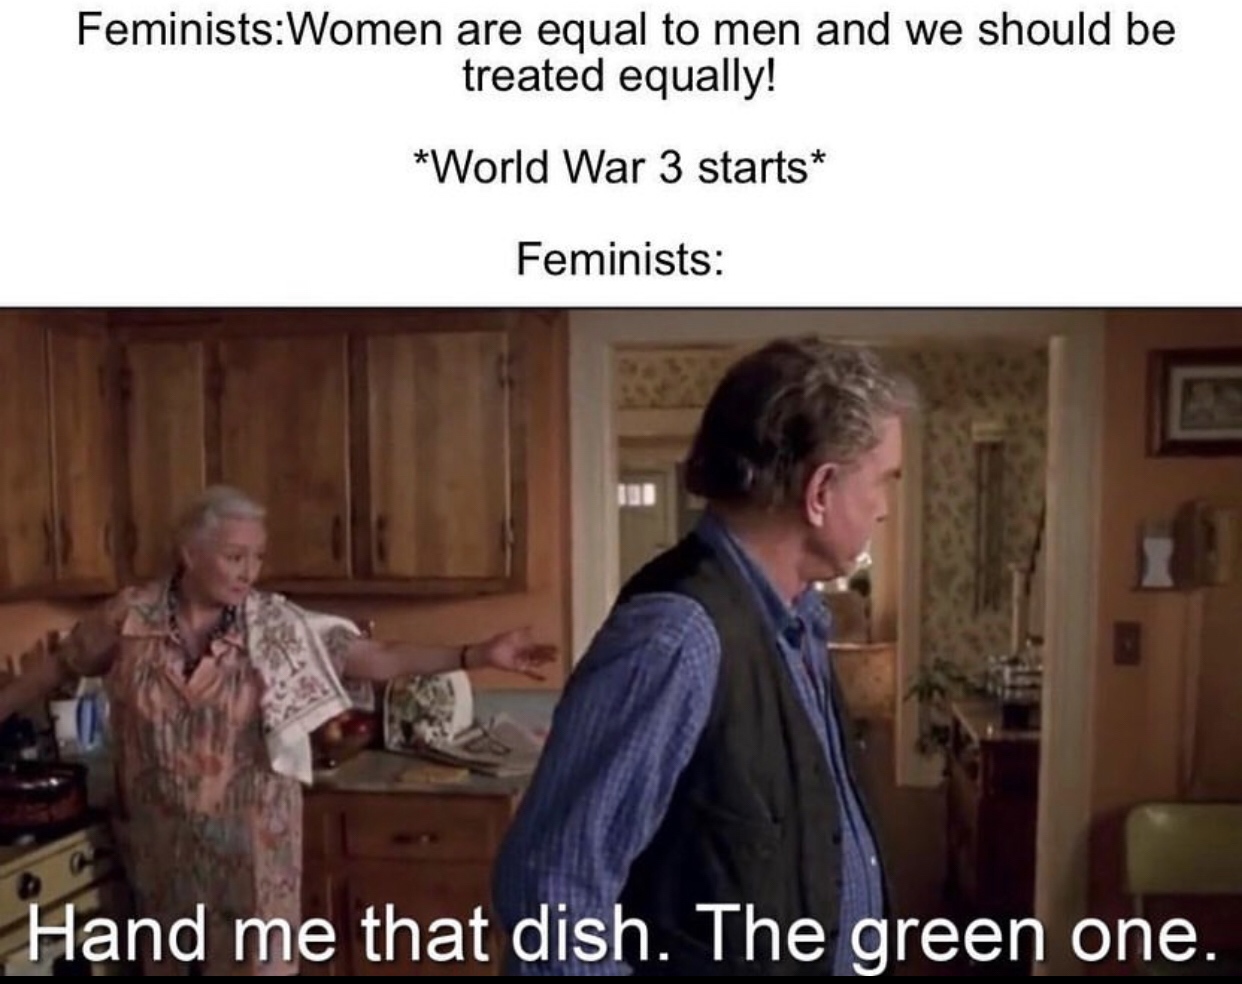 father quotes - FeministsWomen are equal to men and we should be treated equally! World War 3 starts Feminists Hand me that dish. The green one.